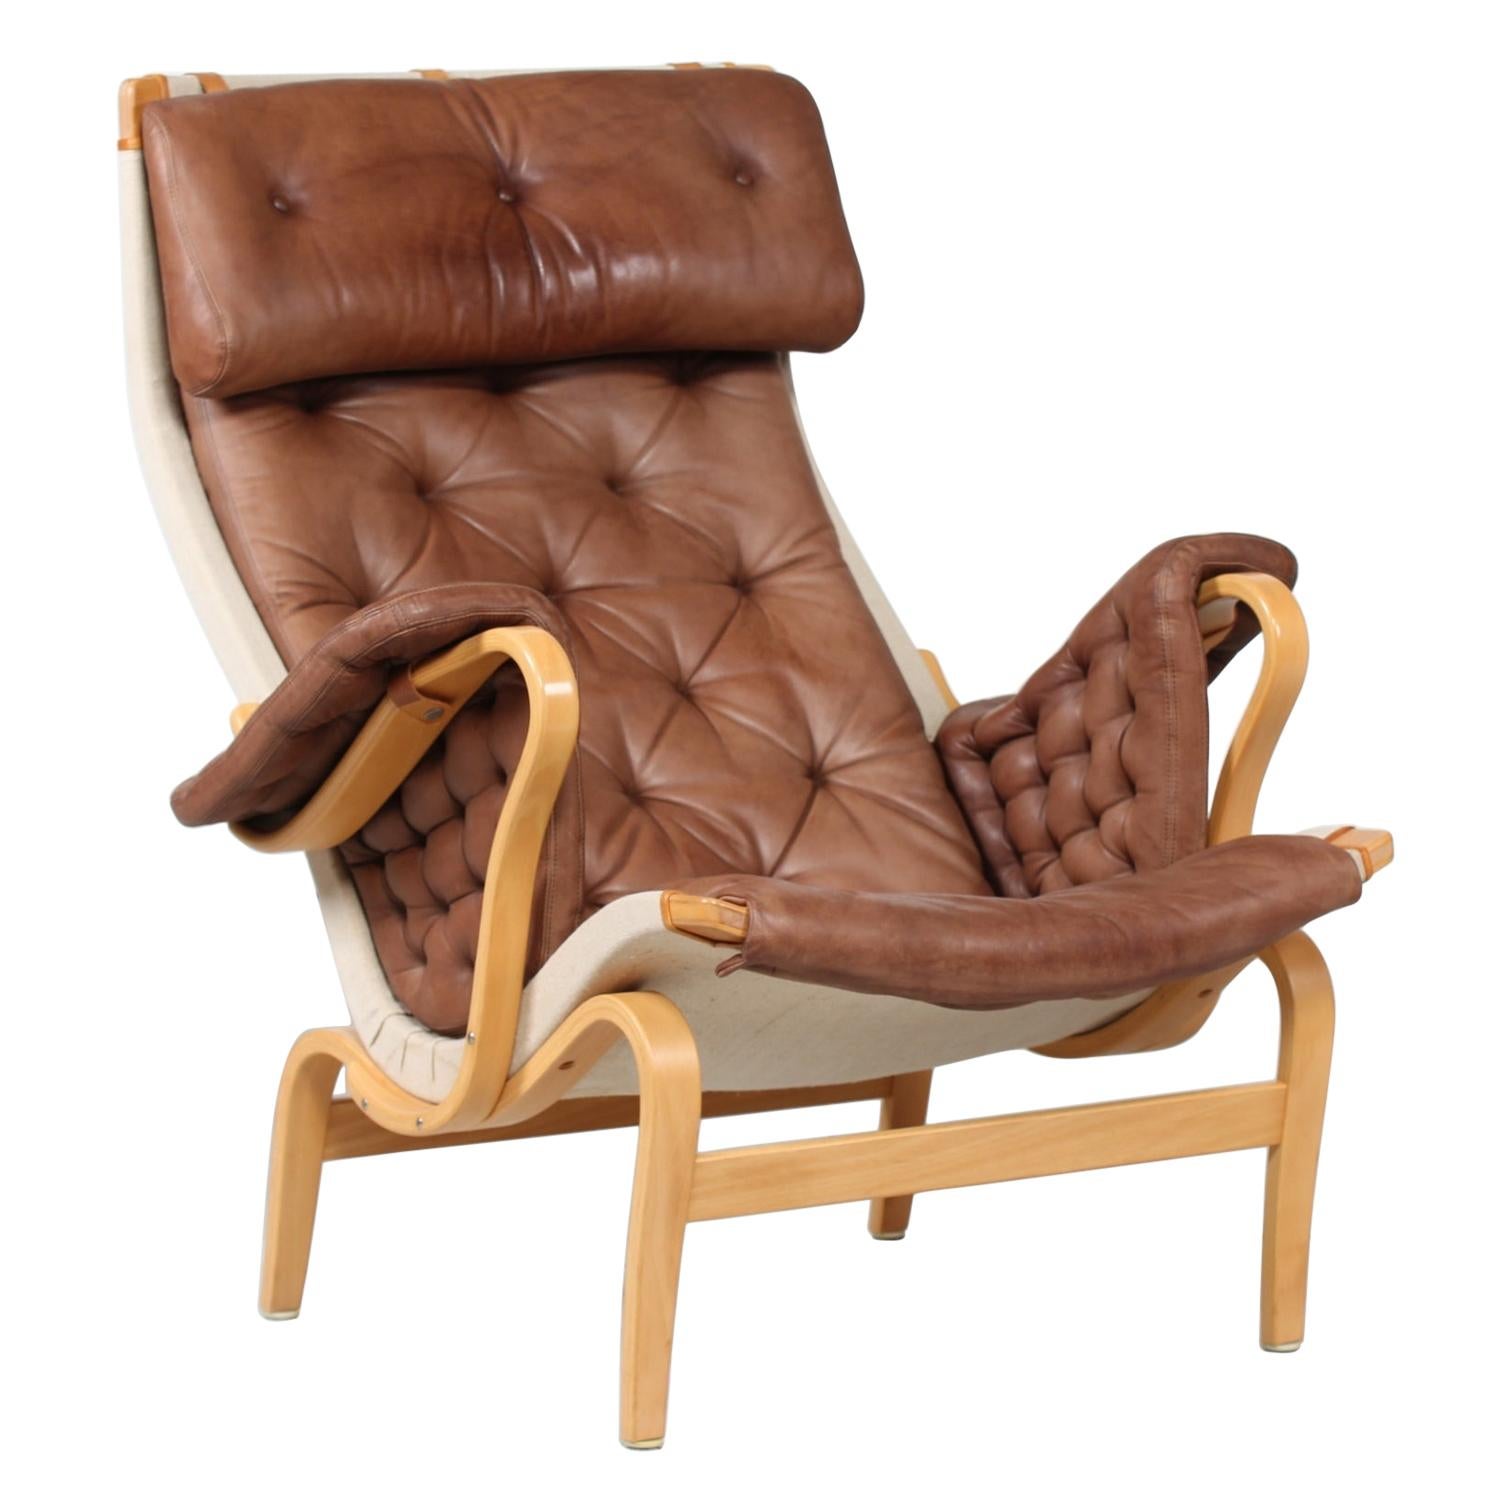 Swedish Bruno Mathsson Pernilla Easy Chair of Beech and Cognac Colored Leather